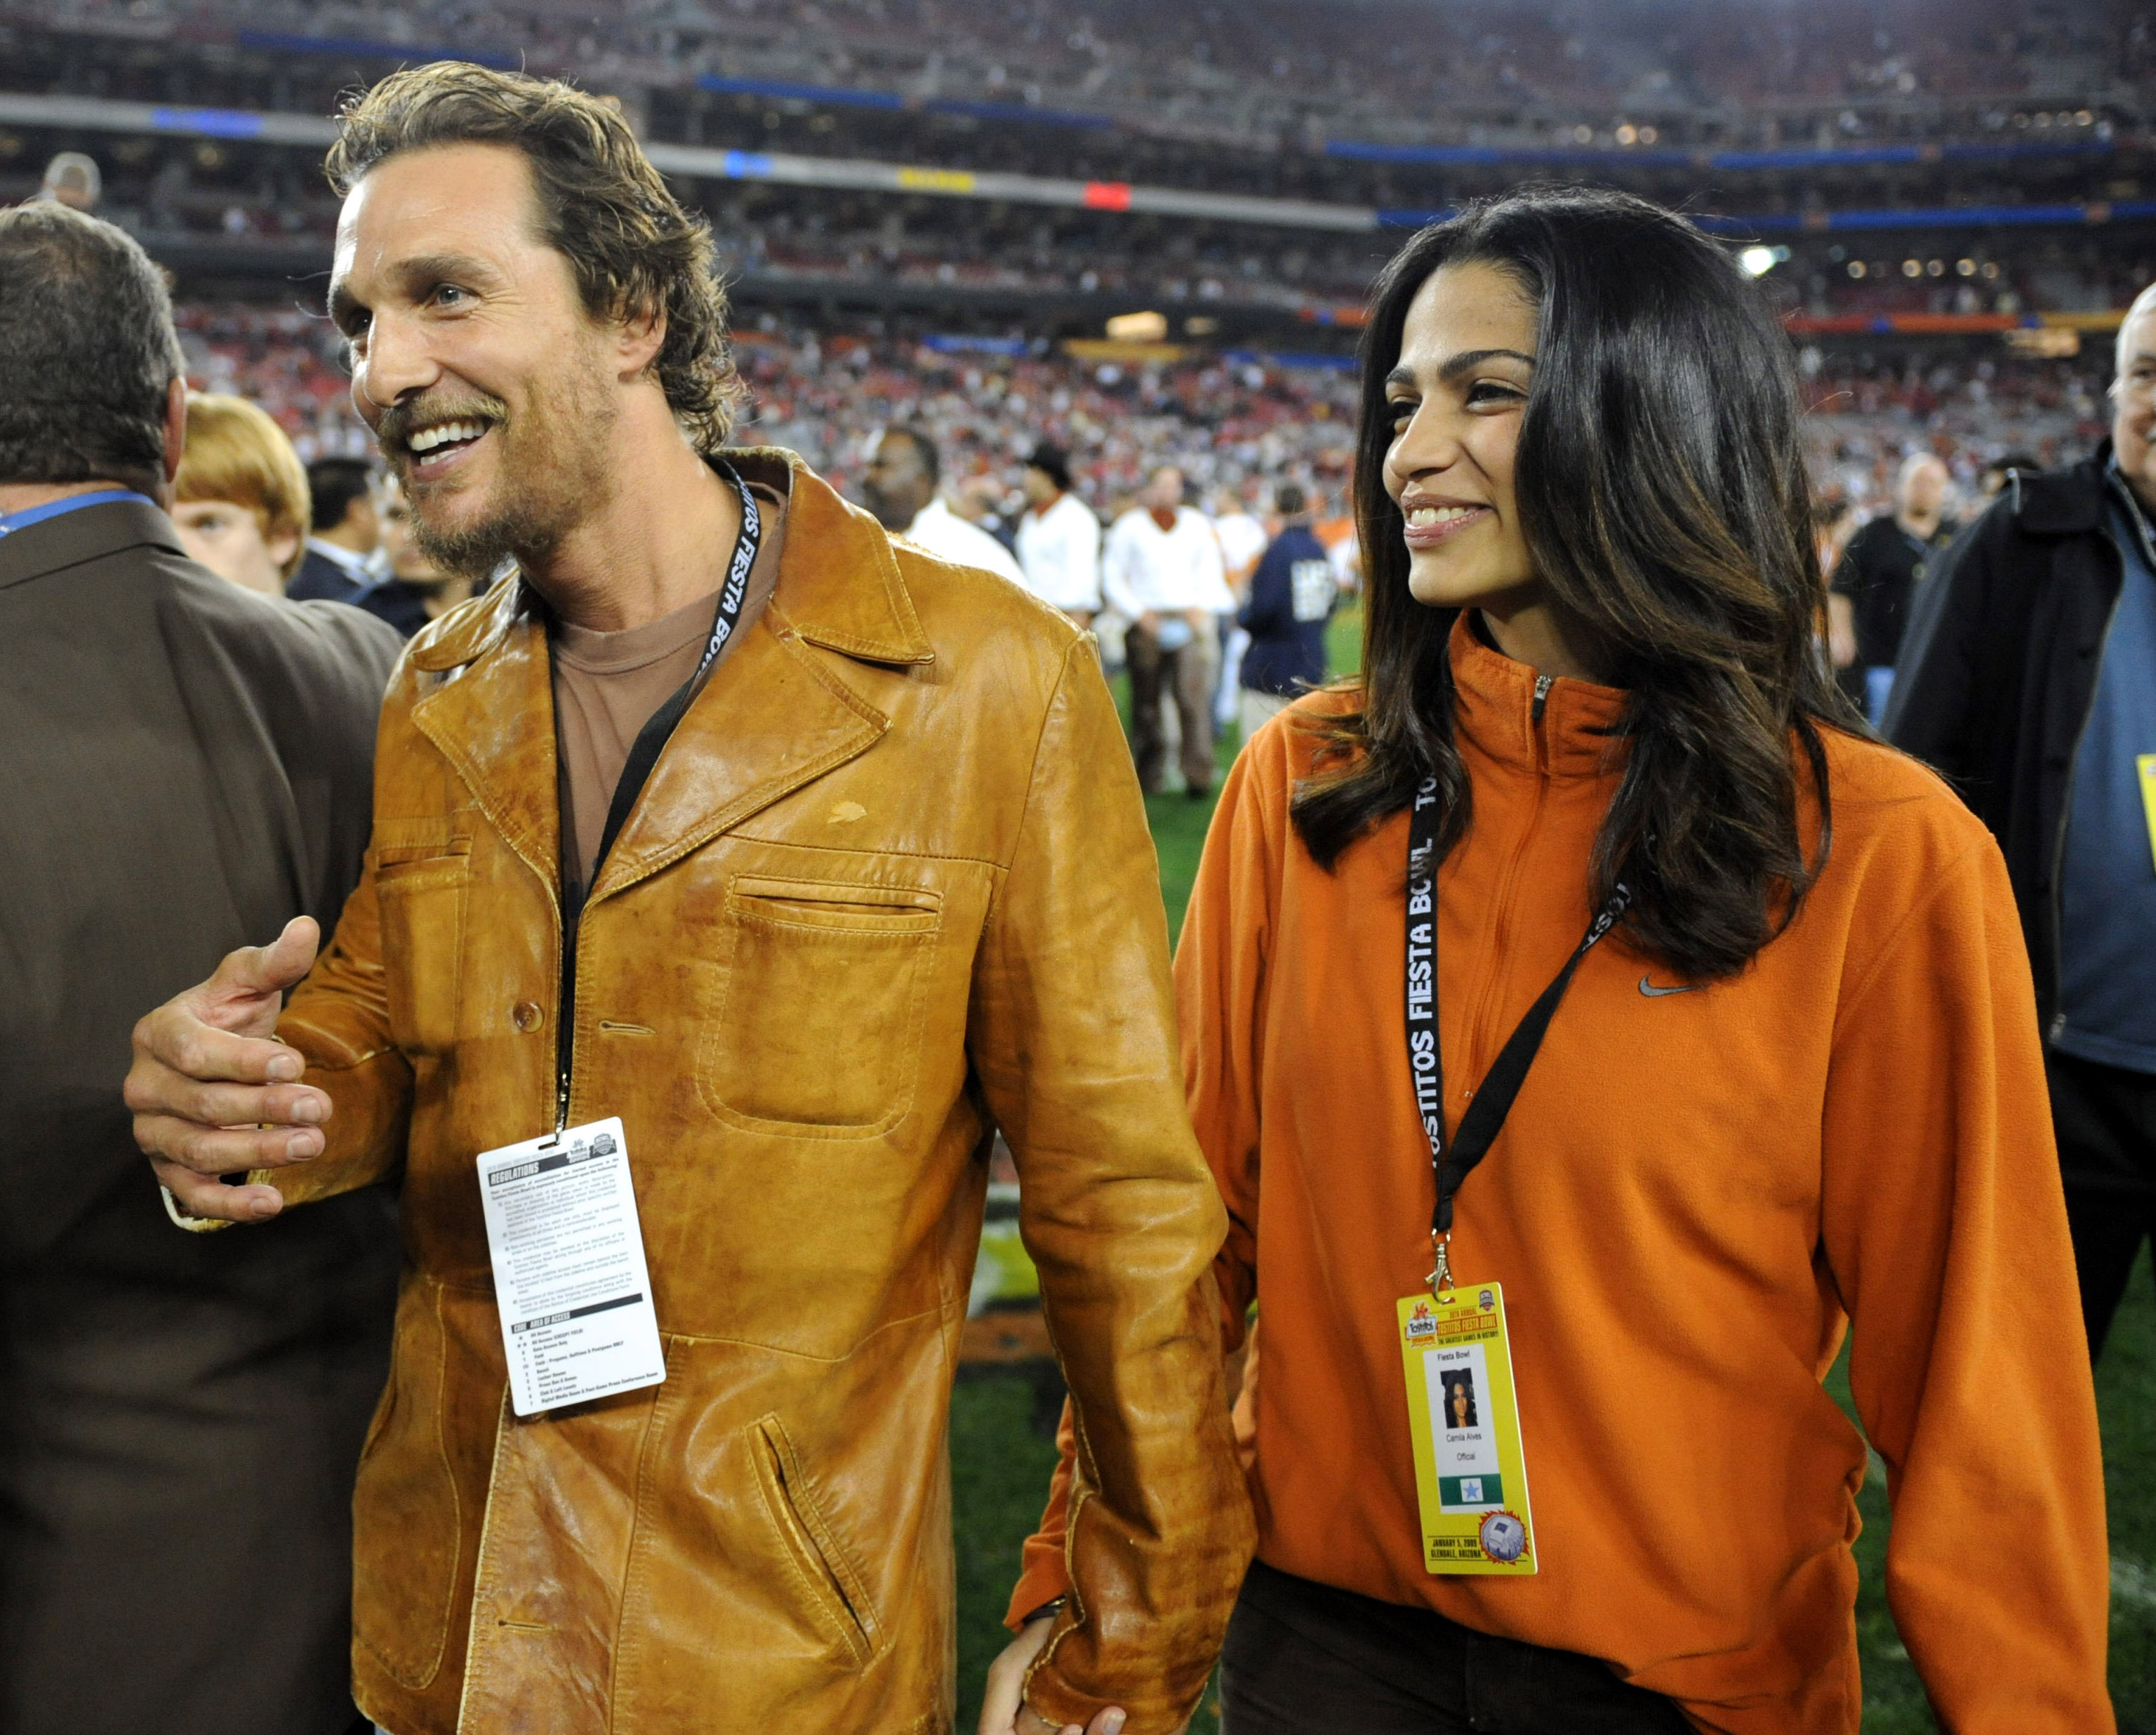 Matthew McConaughey and his girlfriend Camila Alves at the Fiesta Bowl for the NCAA Football in Glendale, Arizona, on January 4, 2006 | Source: Getty Images